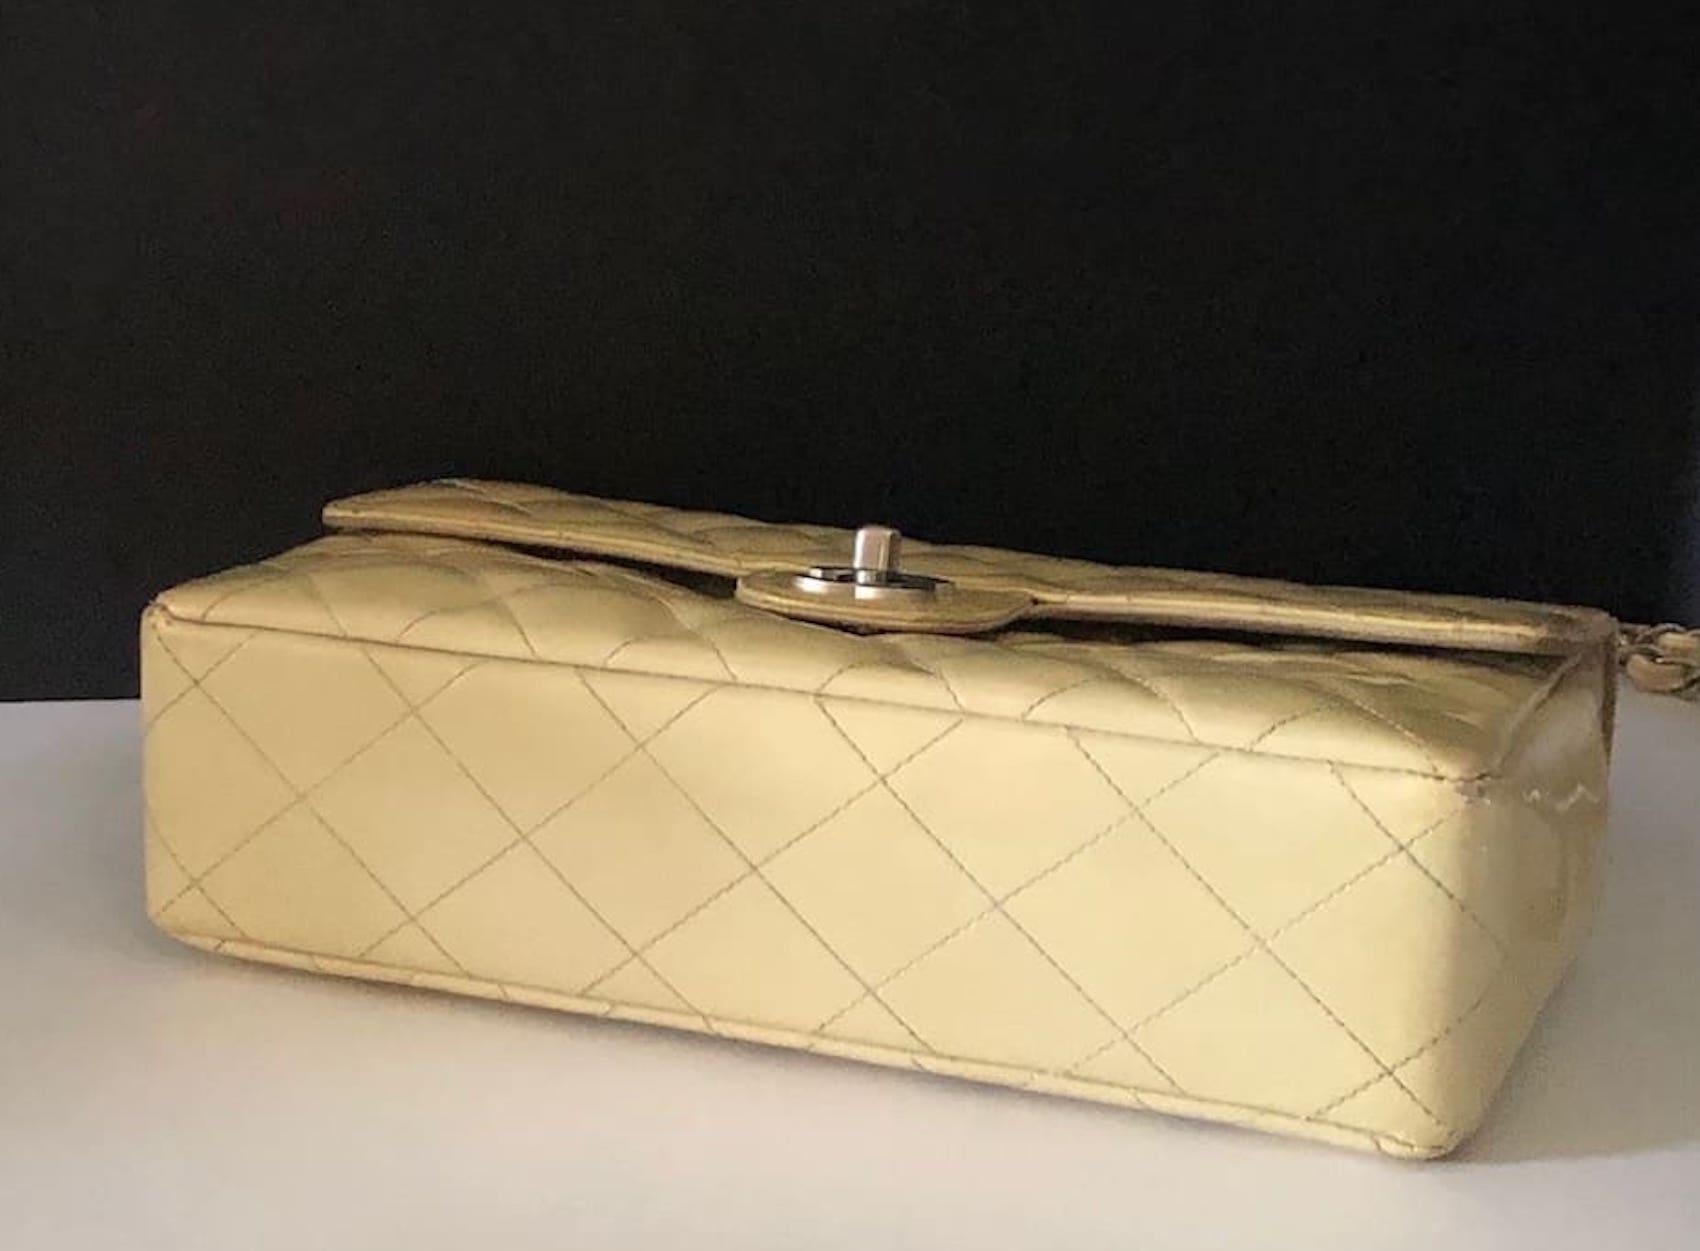 CHANEL Timeless 2.55 Flap Bag Patent Leather Cream Circa 2000 For Sale 3